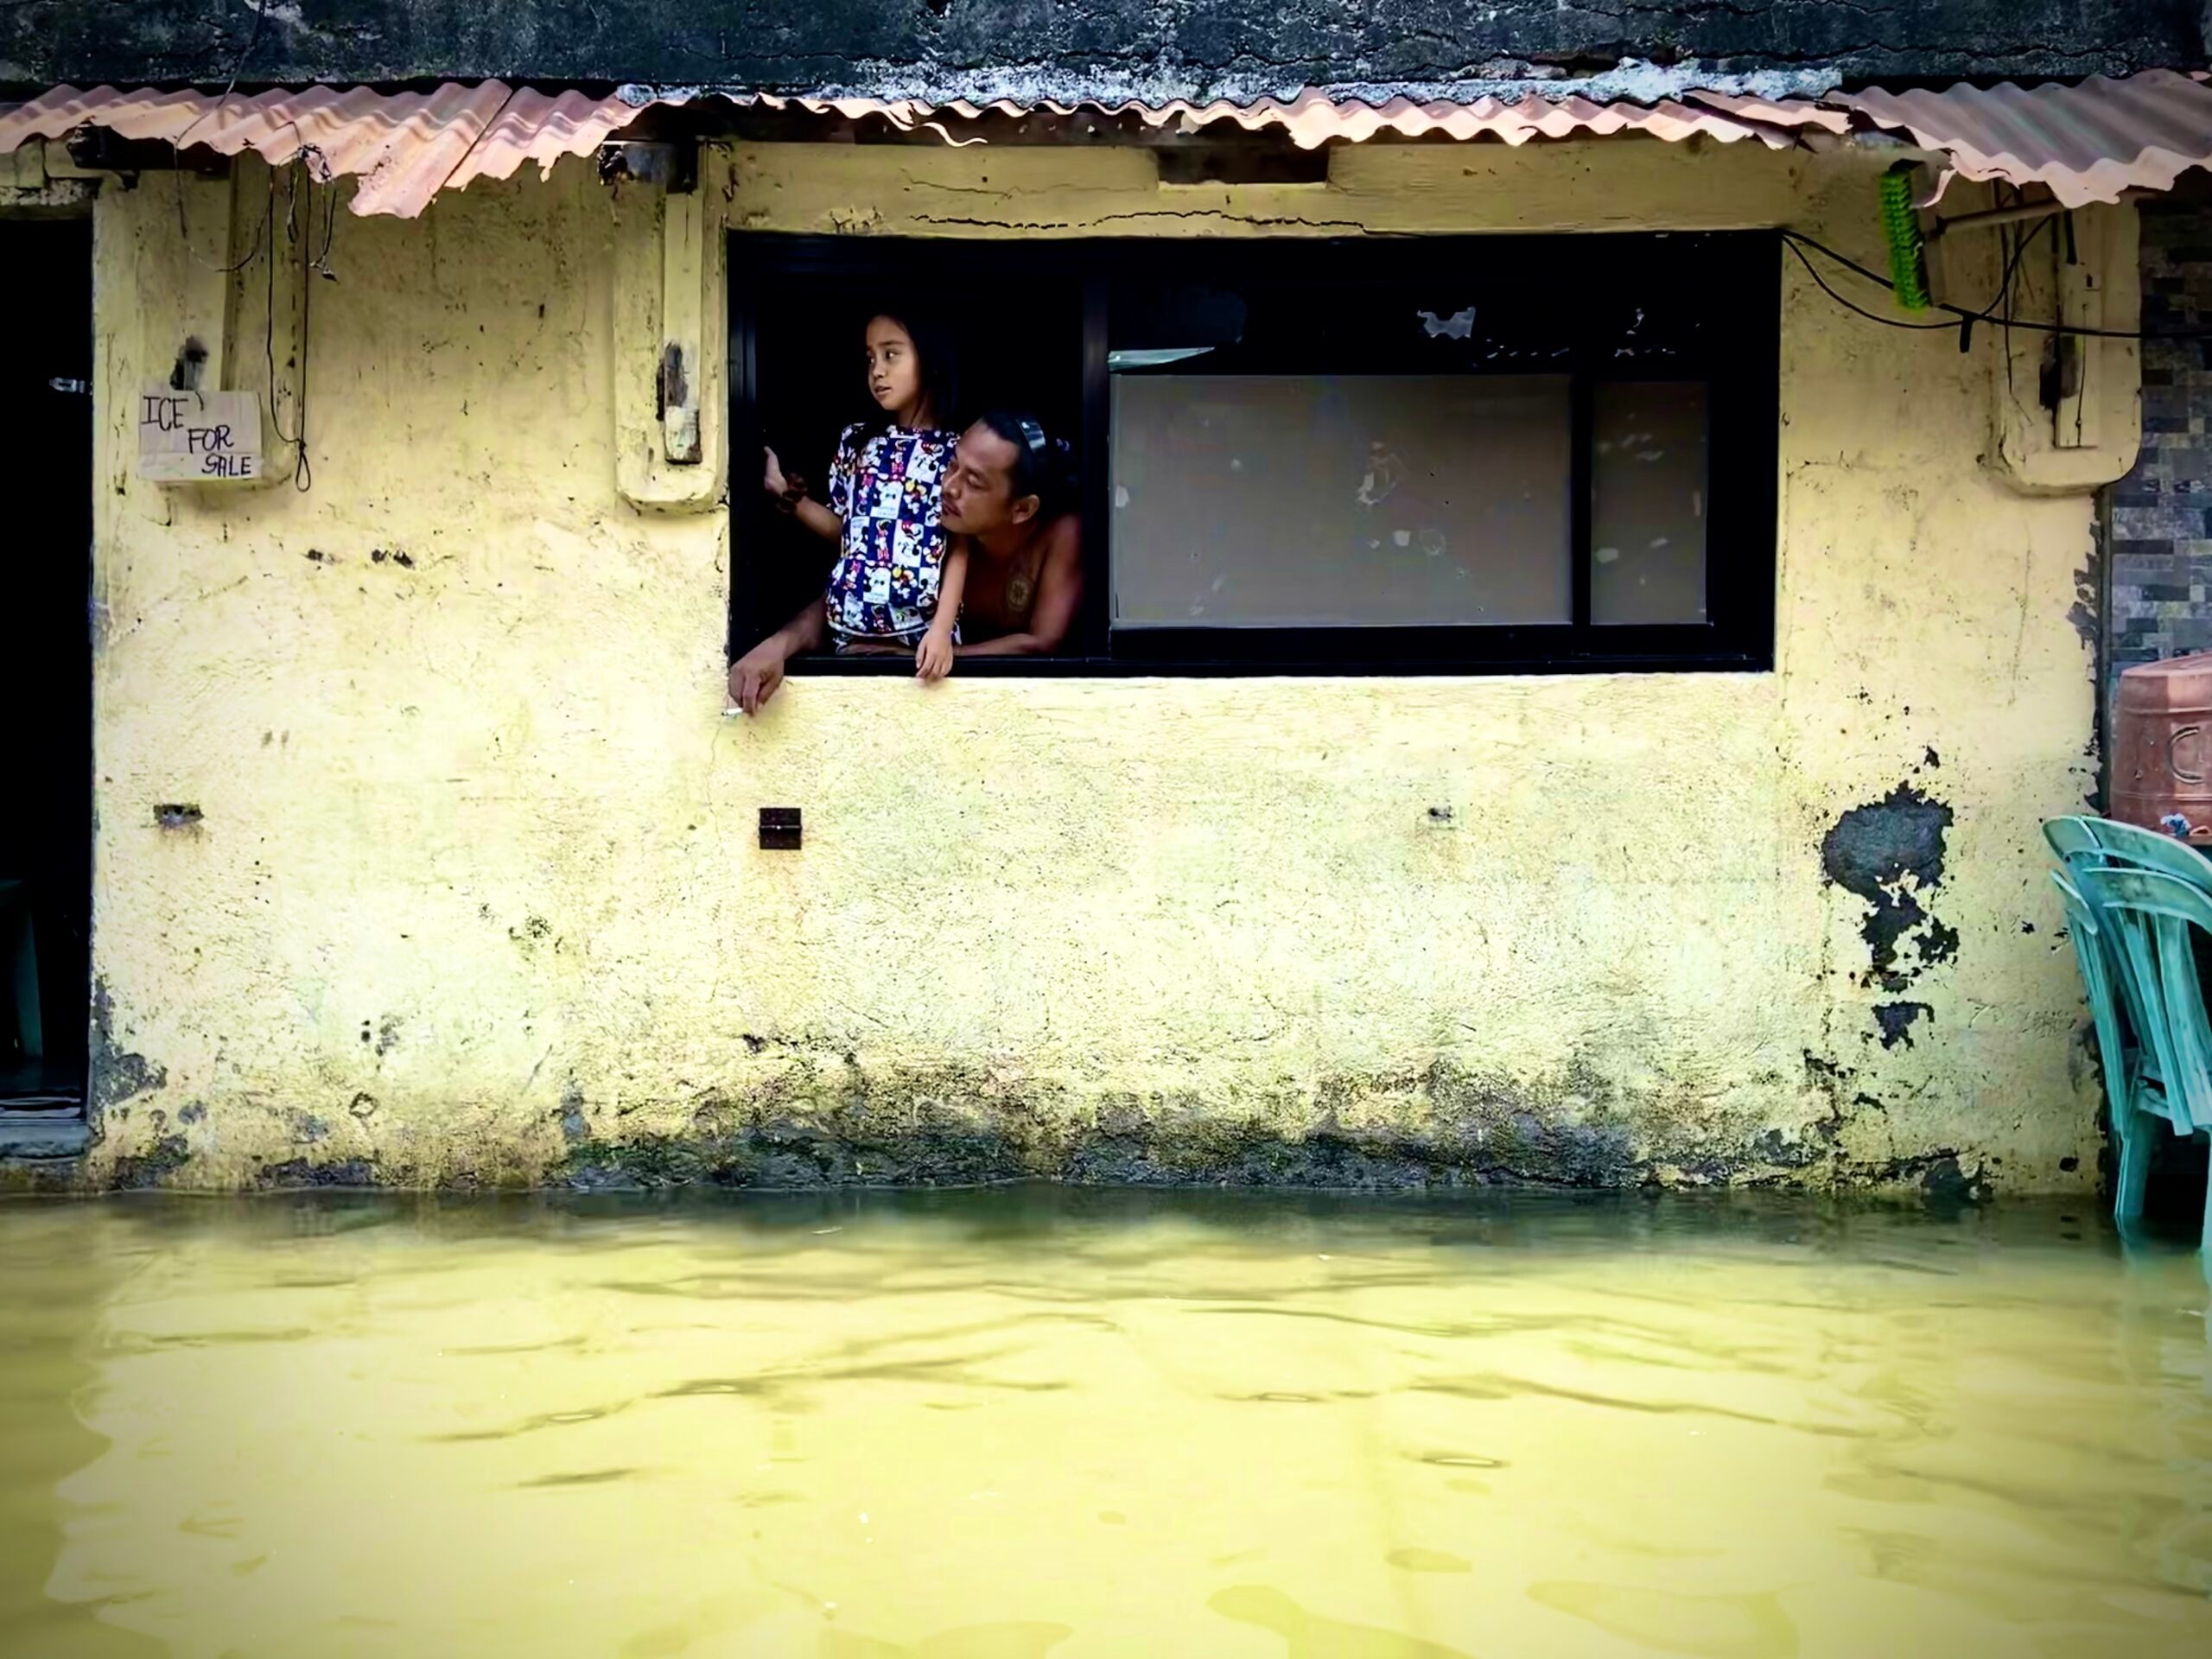 In troubled waters: Rising sea levels threaten sinking town’s survival